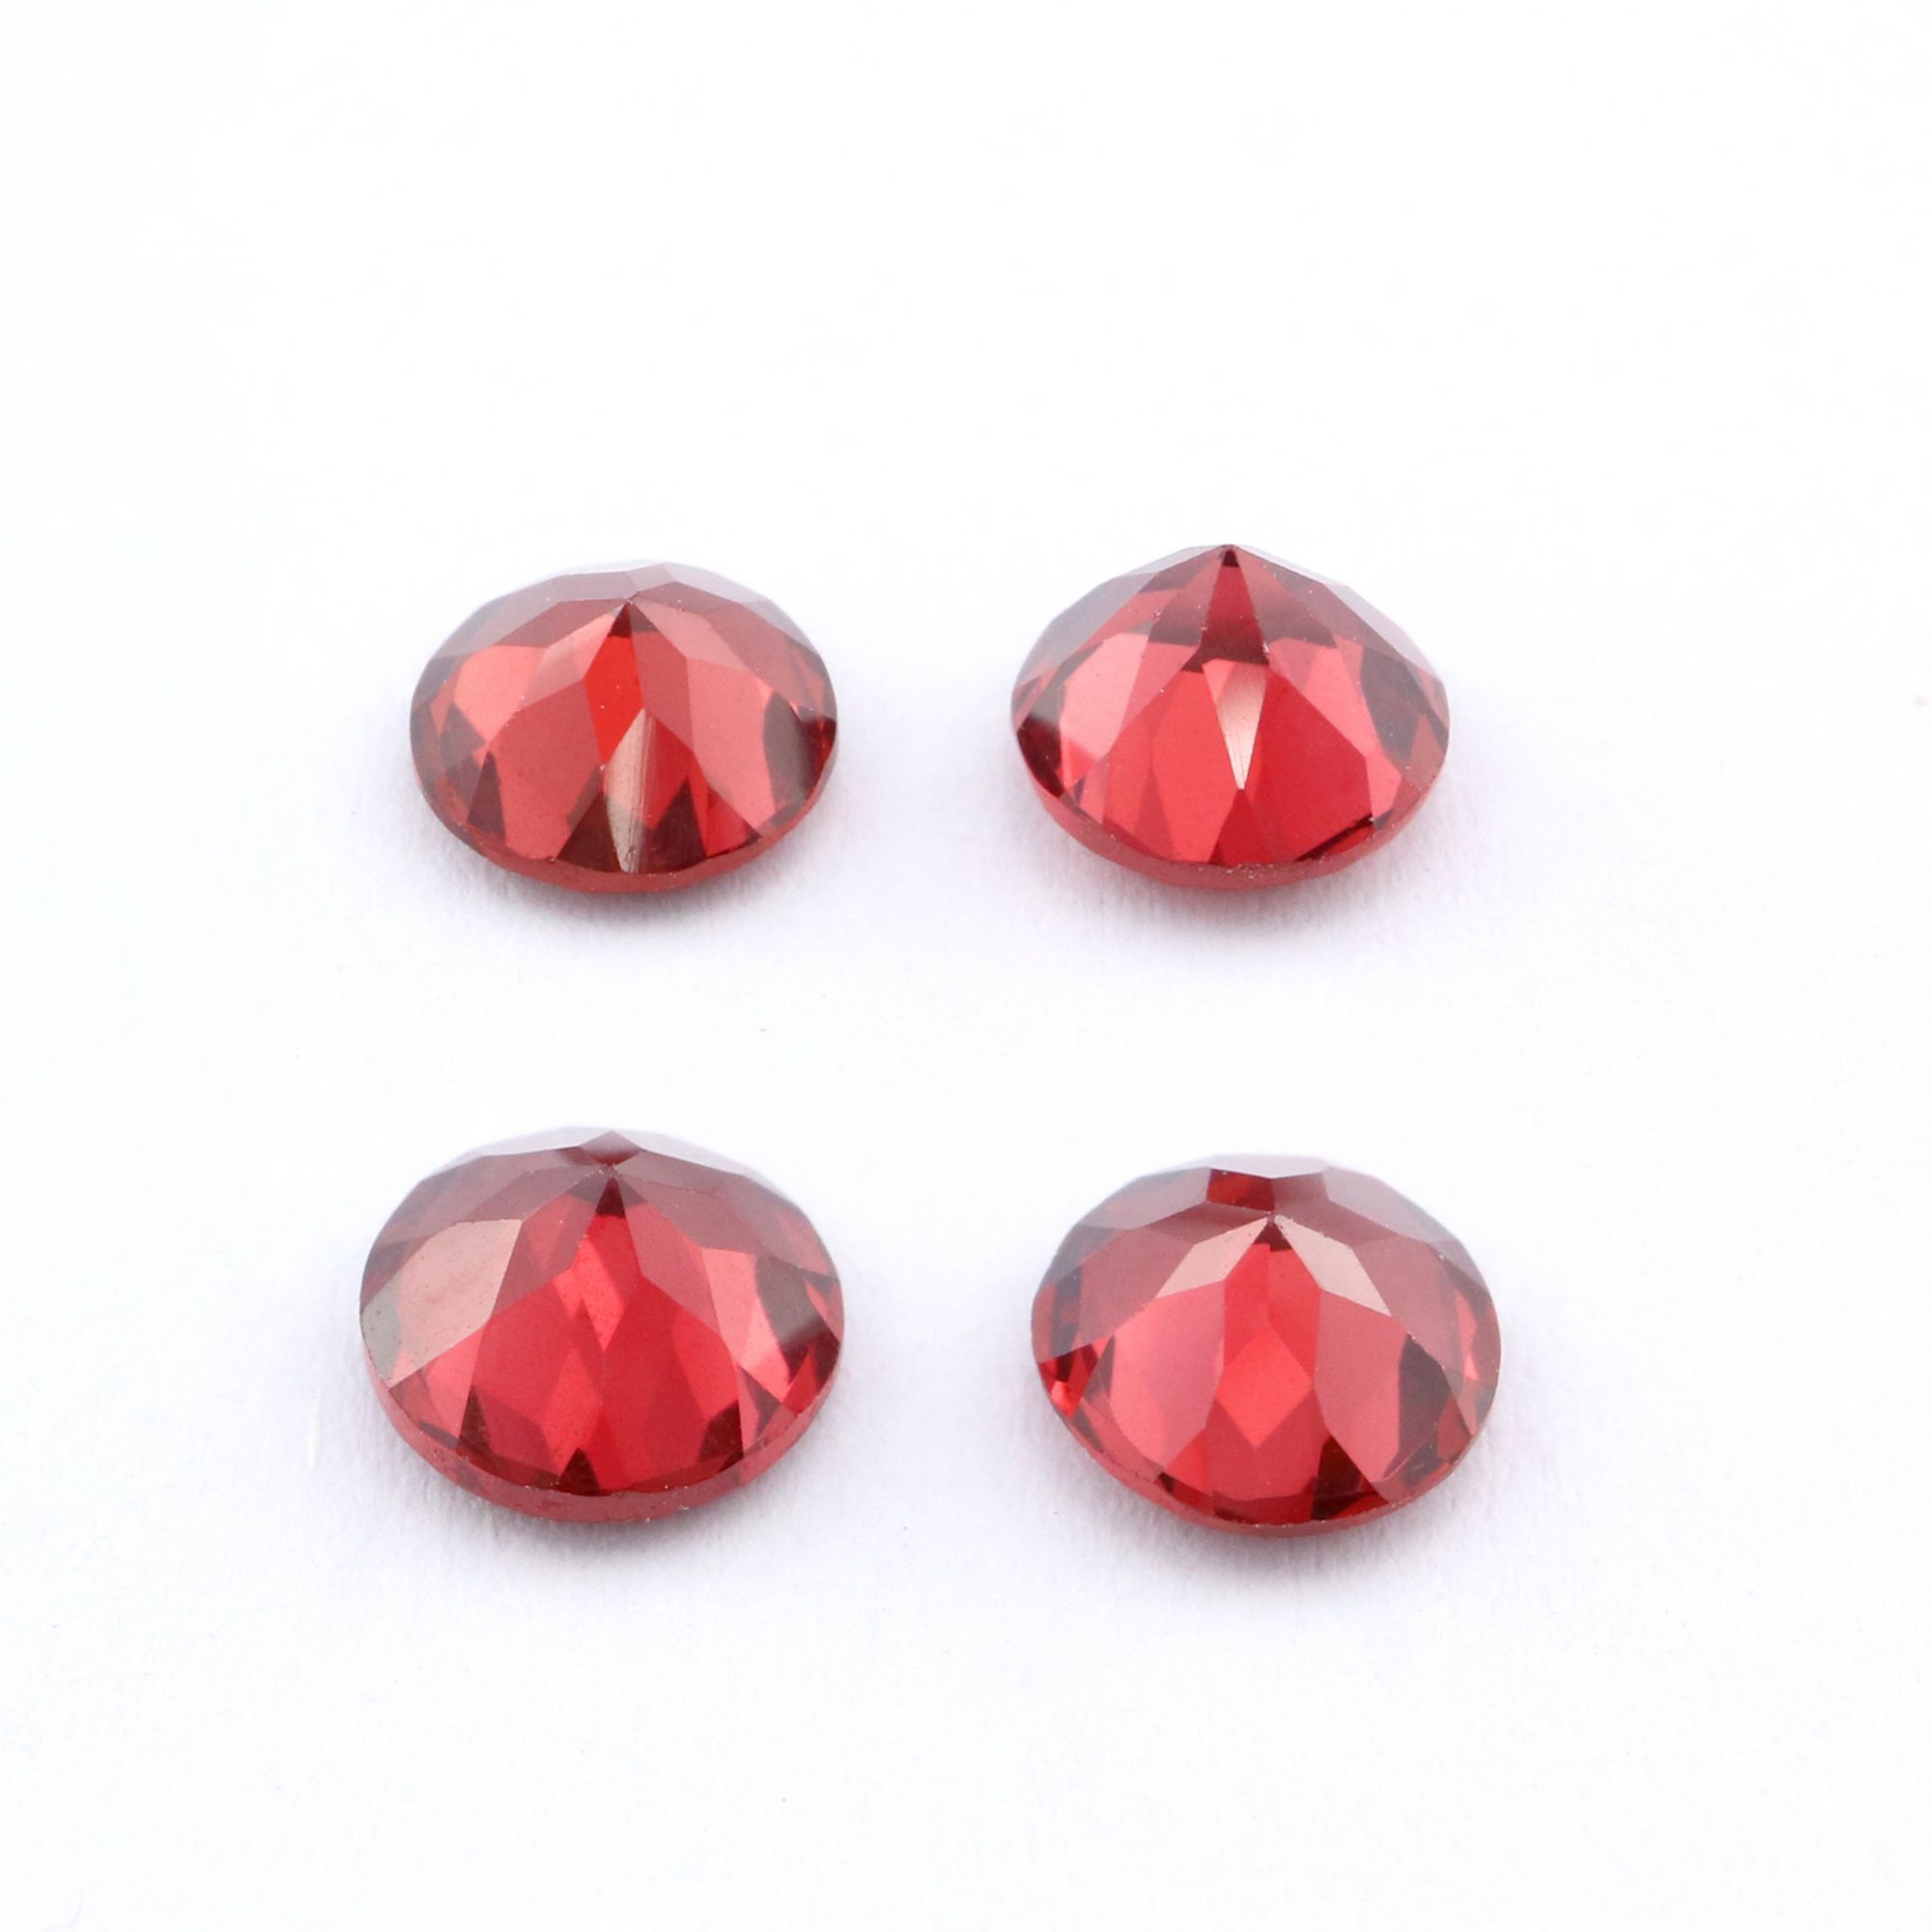 5Pcs Round Red Garnet January Birthstone Faceted Cut Loose Gemstone Nature Semi Precious Stone DIY Jewelry Supplies 4110168 - Click Image to Close